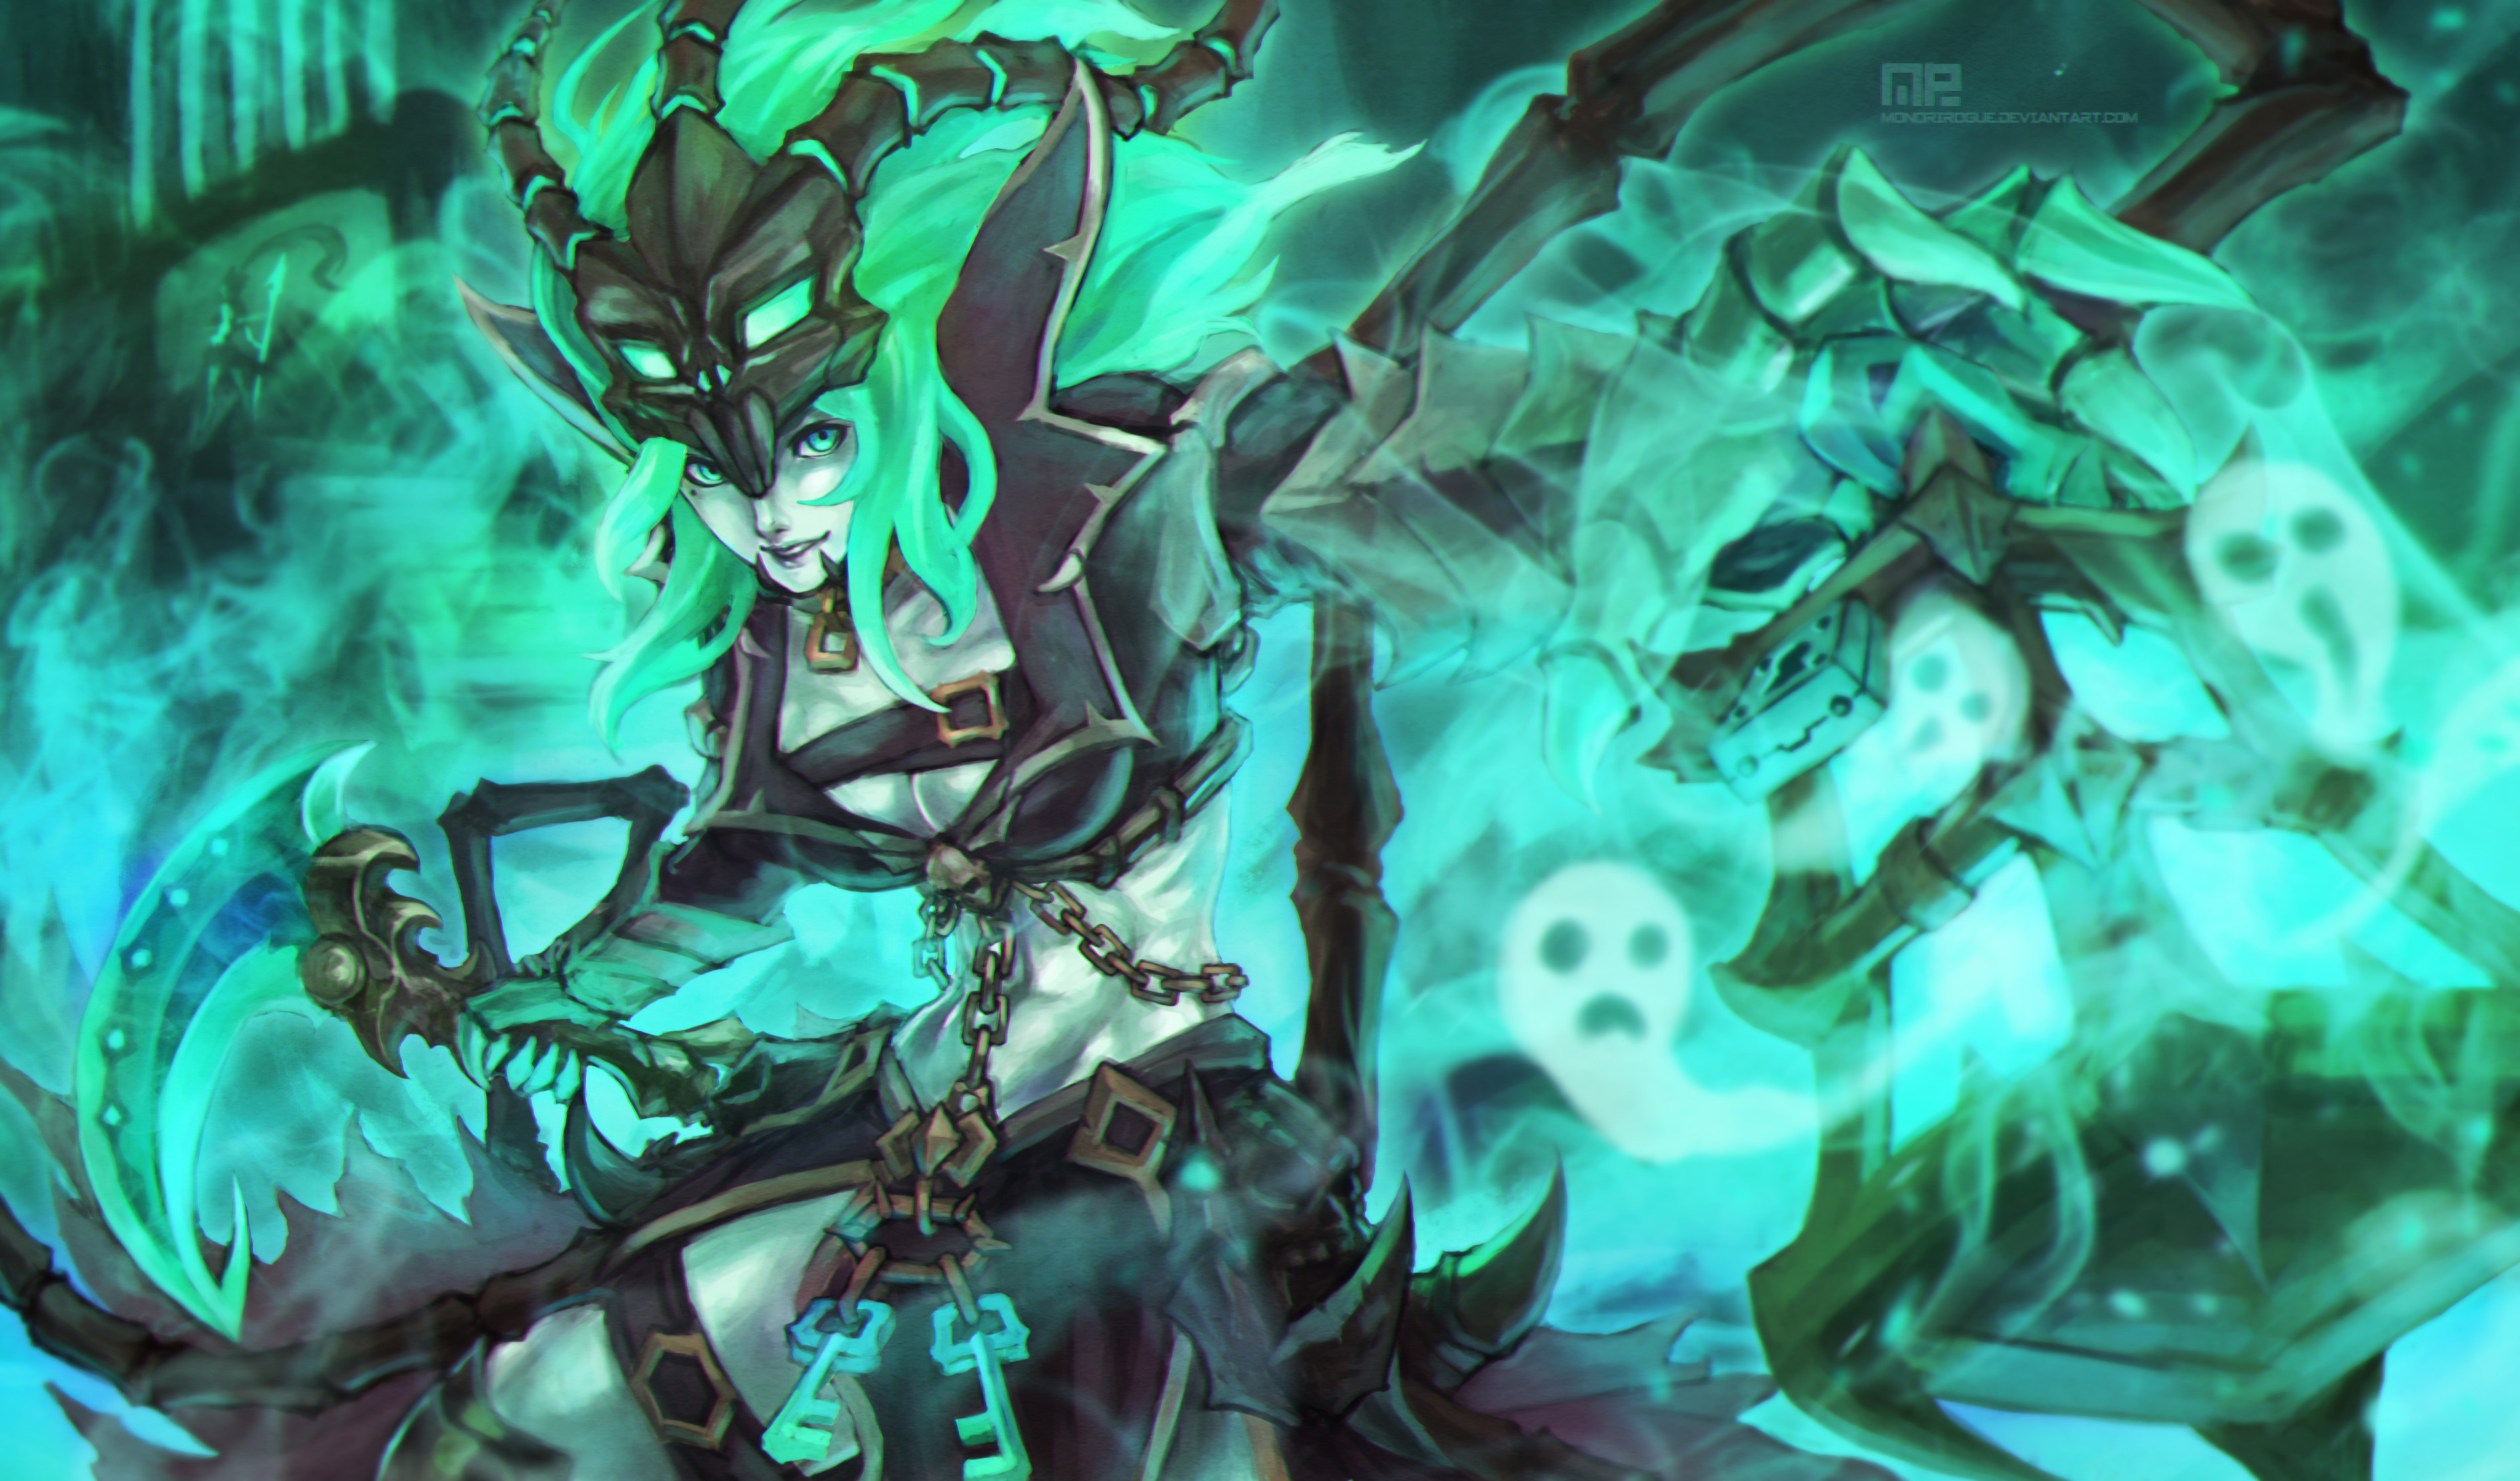 General 3777x2220 League of Legends Thresh (League Of Legends) fantasy girl PC gaming green Tresh (League of Legends) video games fan art DeviantArt video game girls video game characters